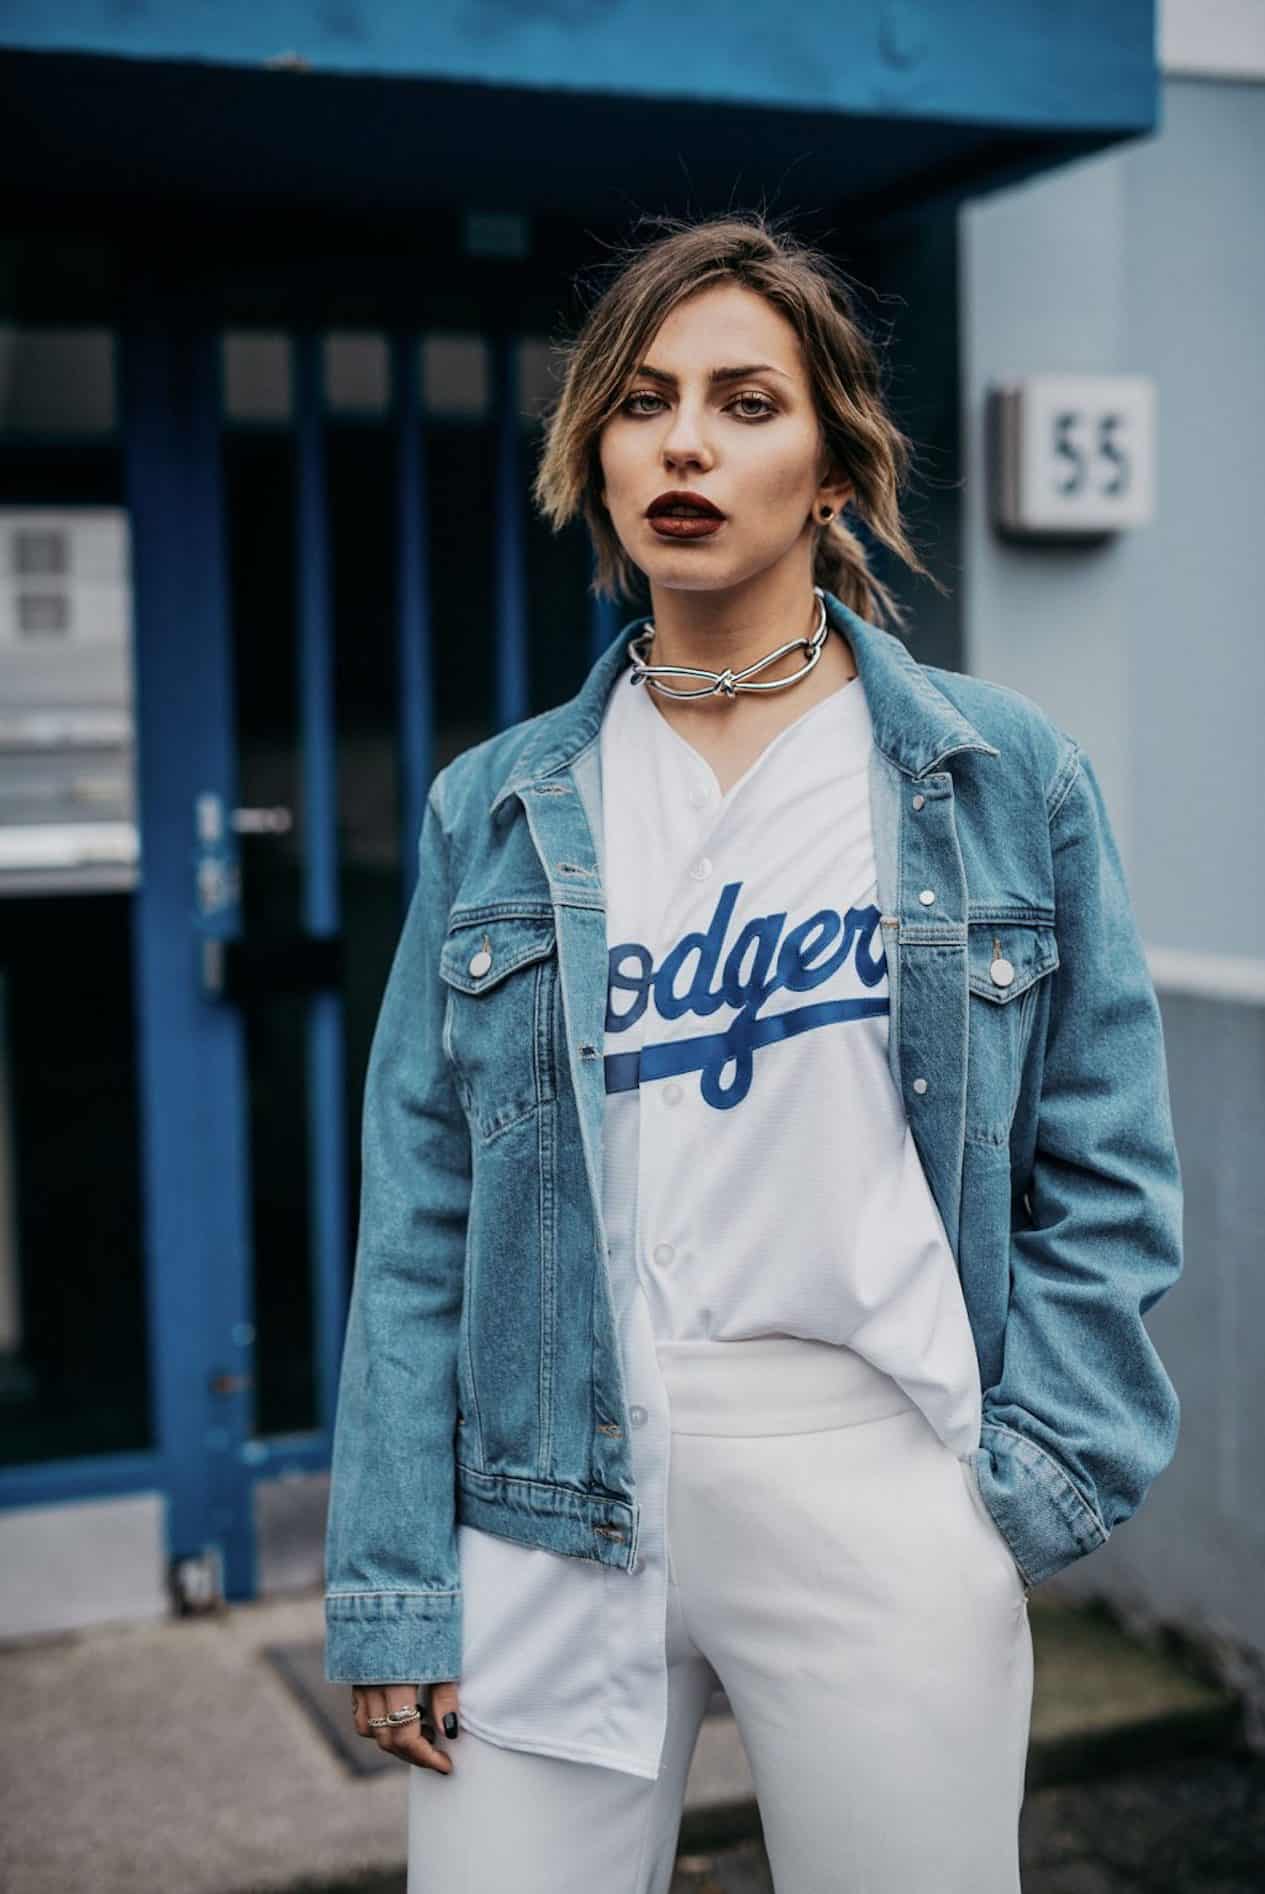 baseball jersey over hoodie outfit